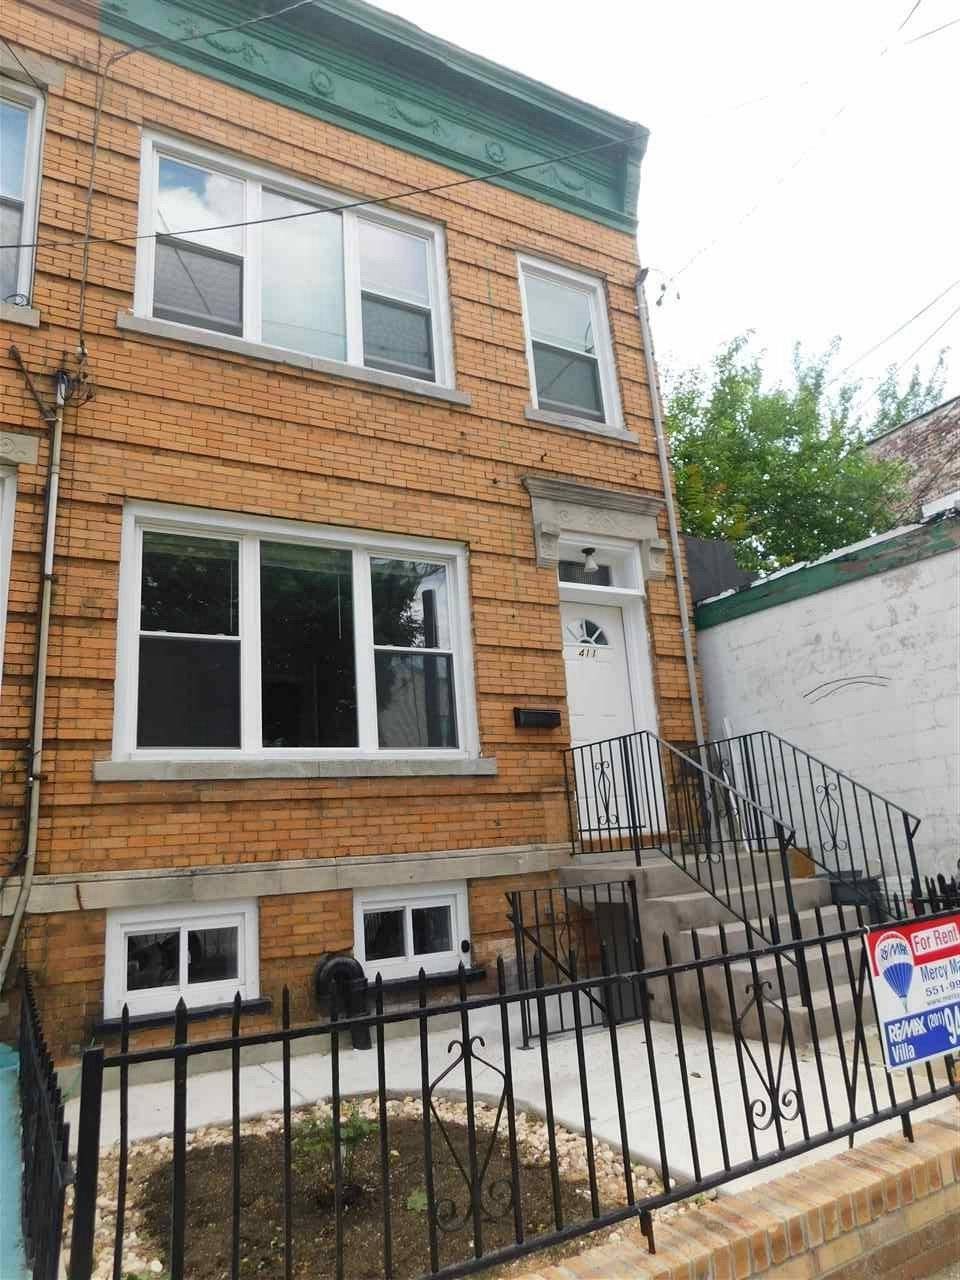 Charming mint condition 2 bedroom apartment around the corner from transit to Journal Square and downtown